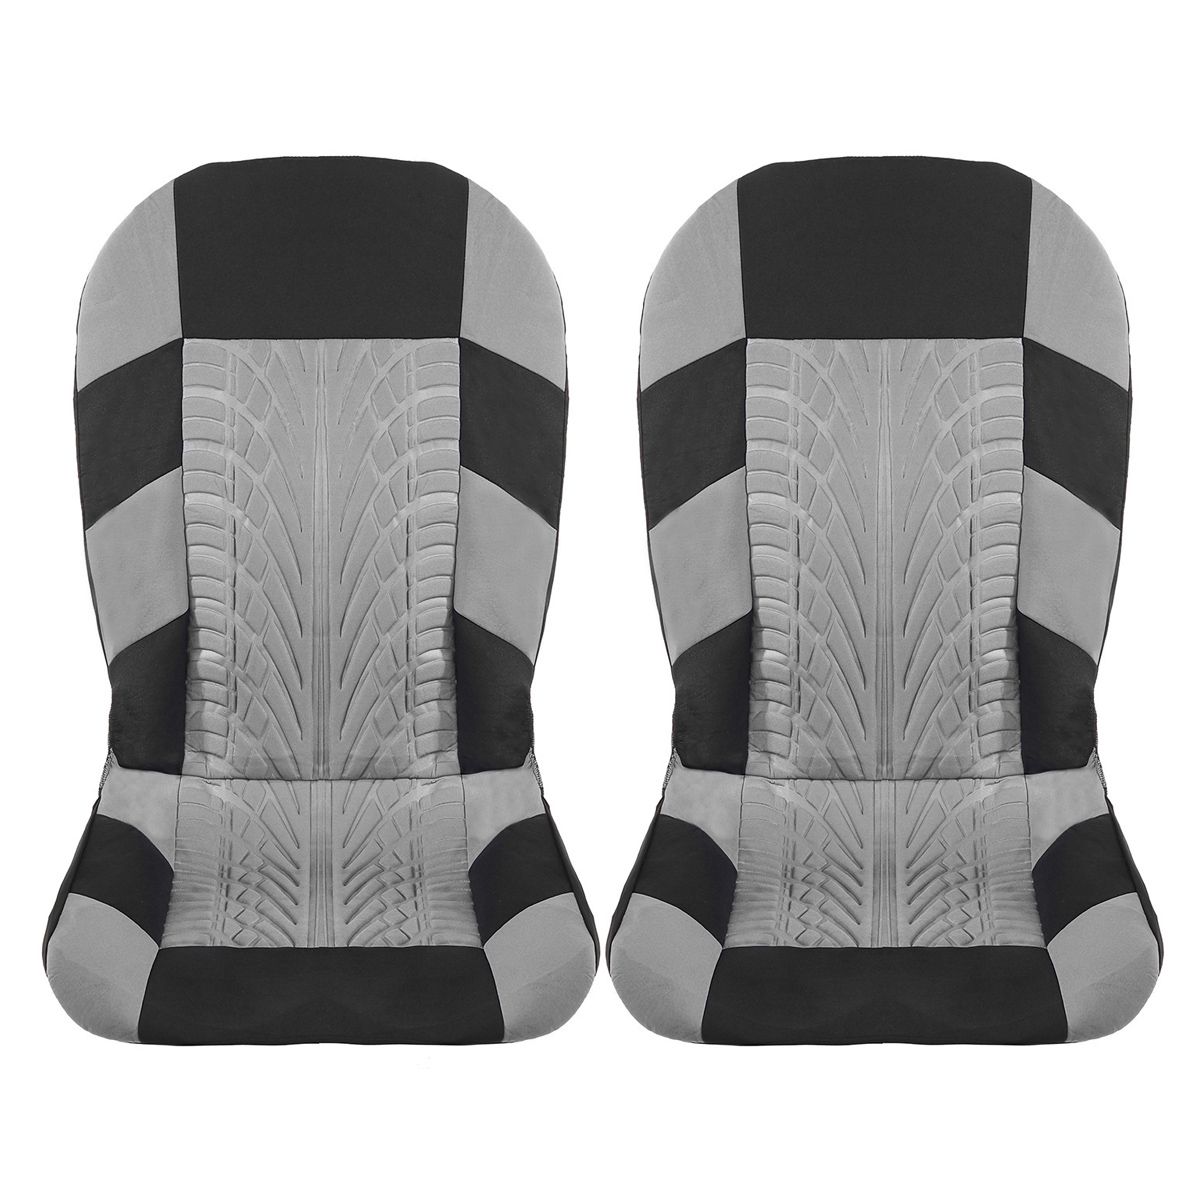 New 9PCS Universal Seat Covers for Car Full Car Seat Cover Car Cushion Case Cover Front Car Seat Cover Car Accessories Car Seats - image 4 of 8